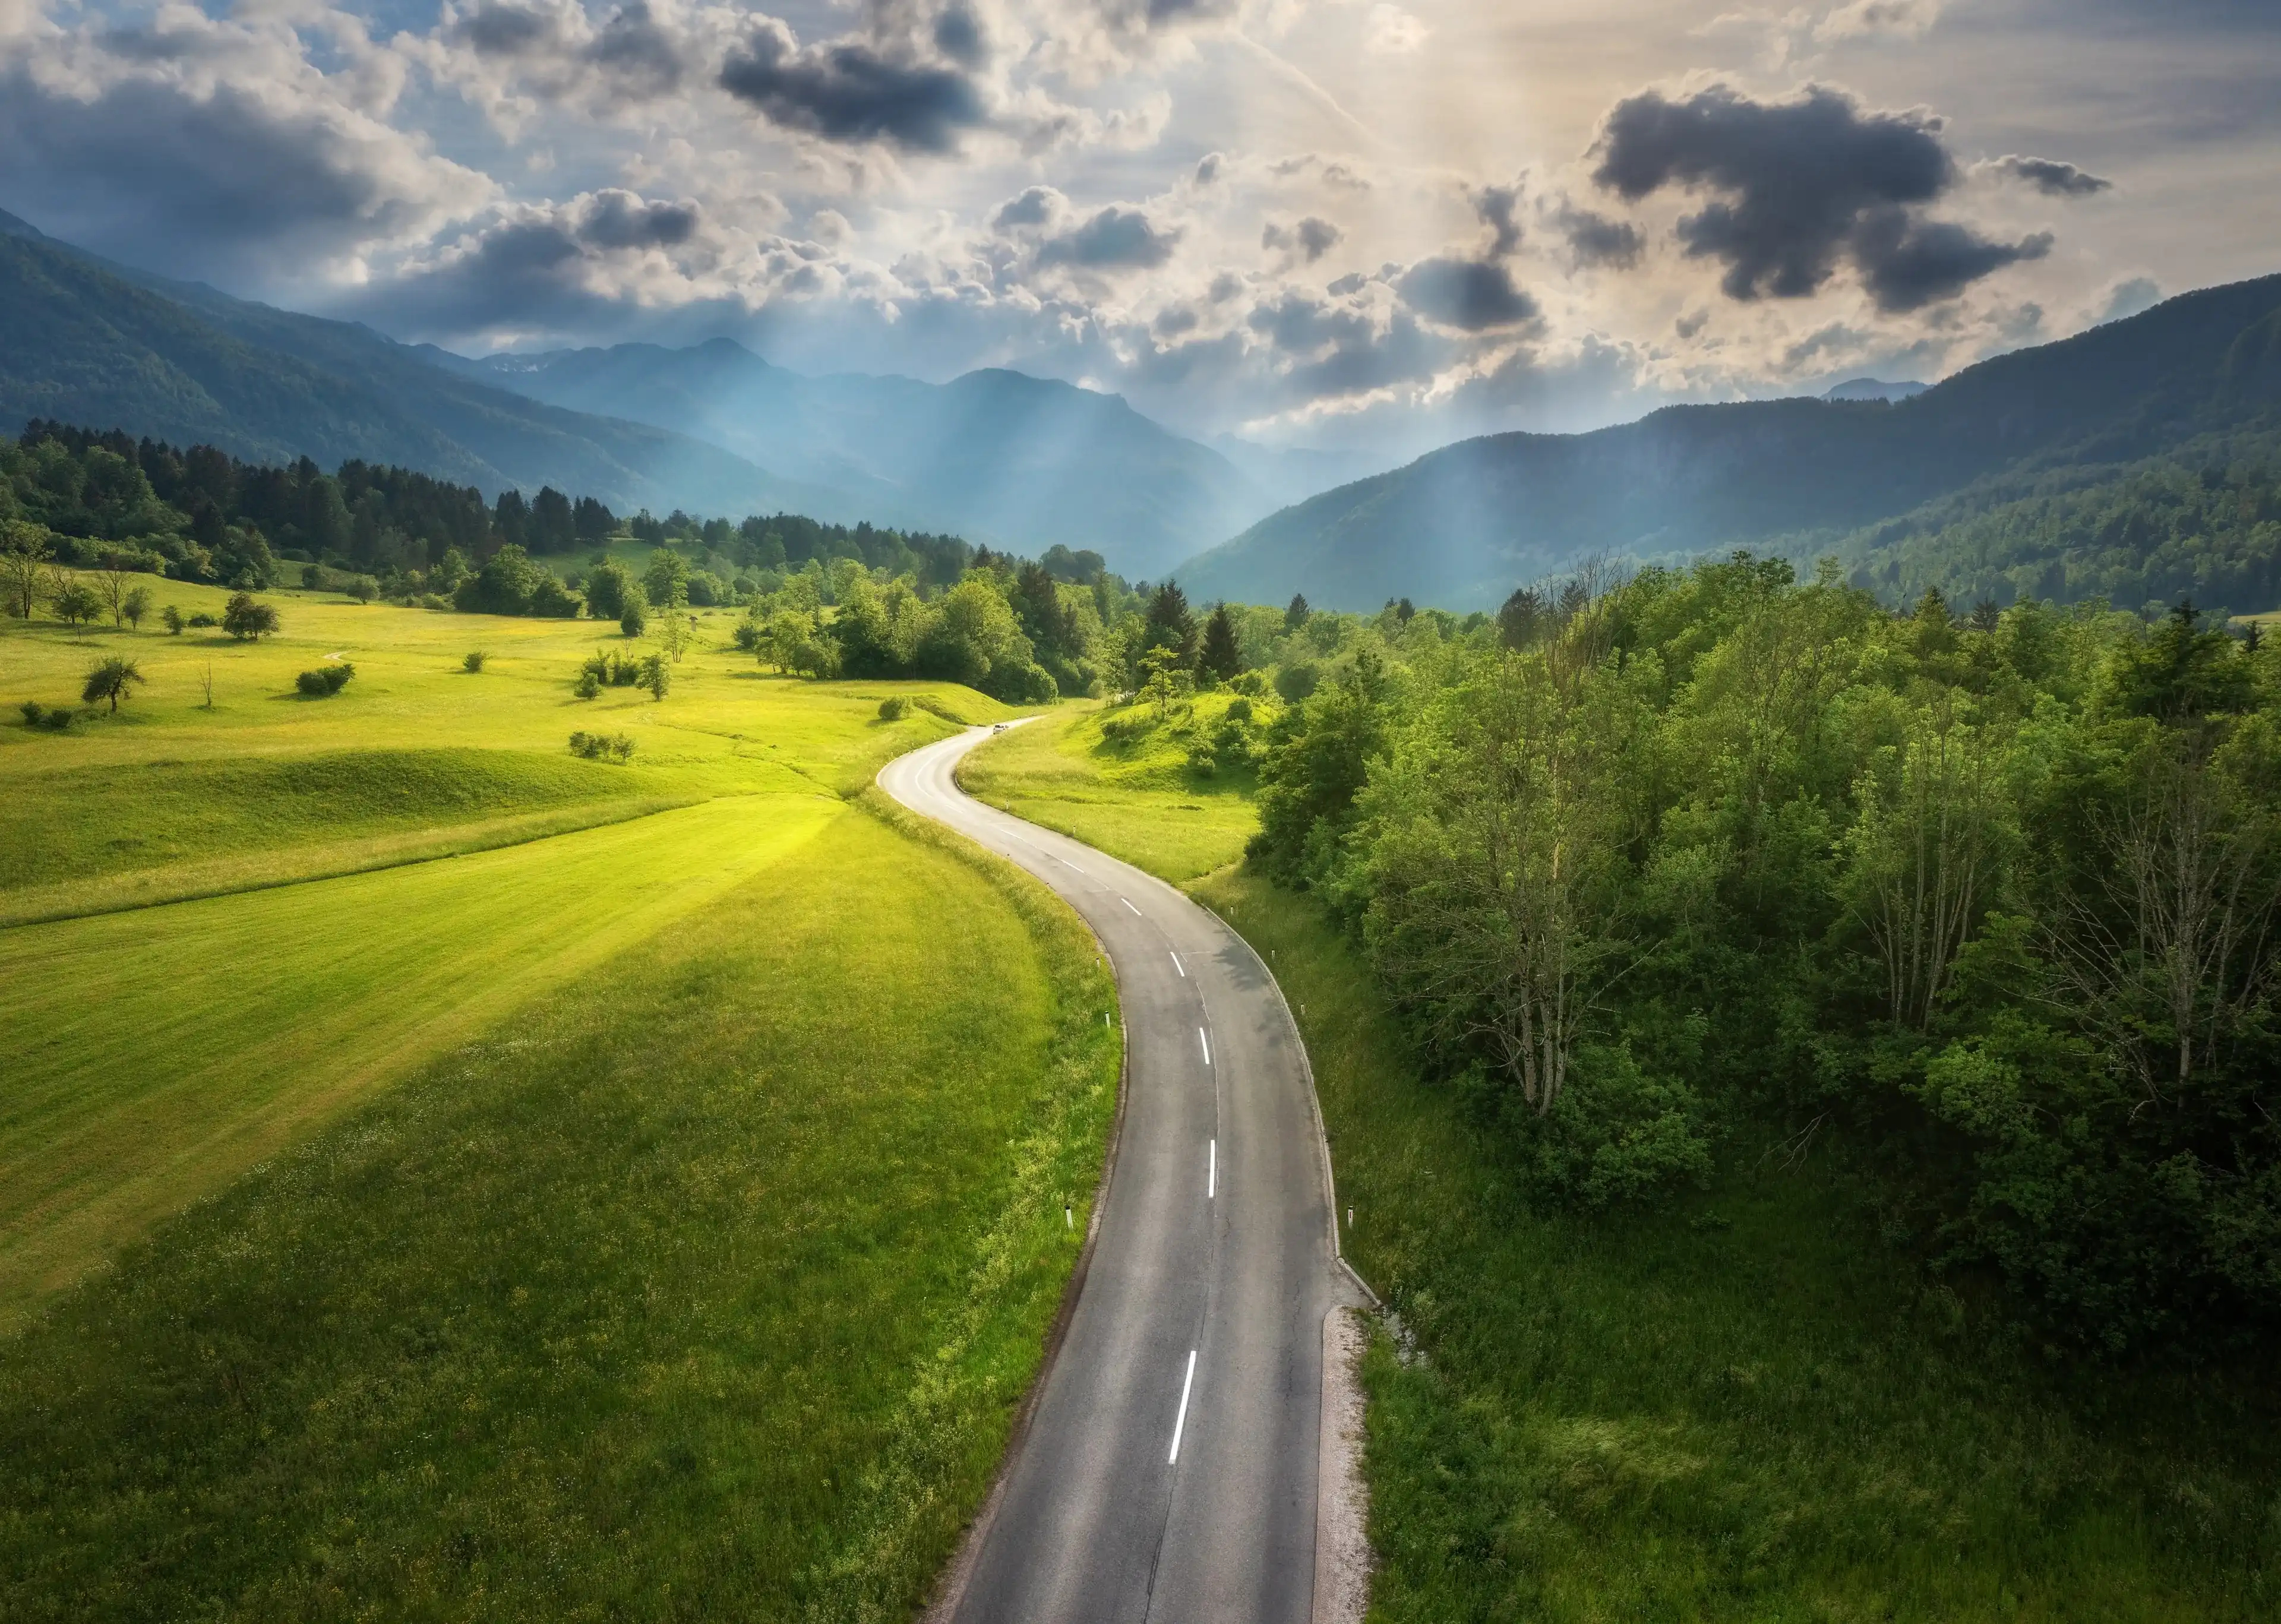 Aerial view of road in green meadows at sunset in summer. Top view from drone of rural road, mountains, forest. Beautiful landscape with roadway, sun rays, trees, hills, green grass, clouds. Slovenia